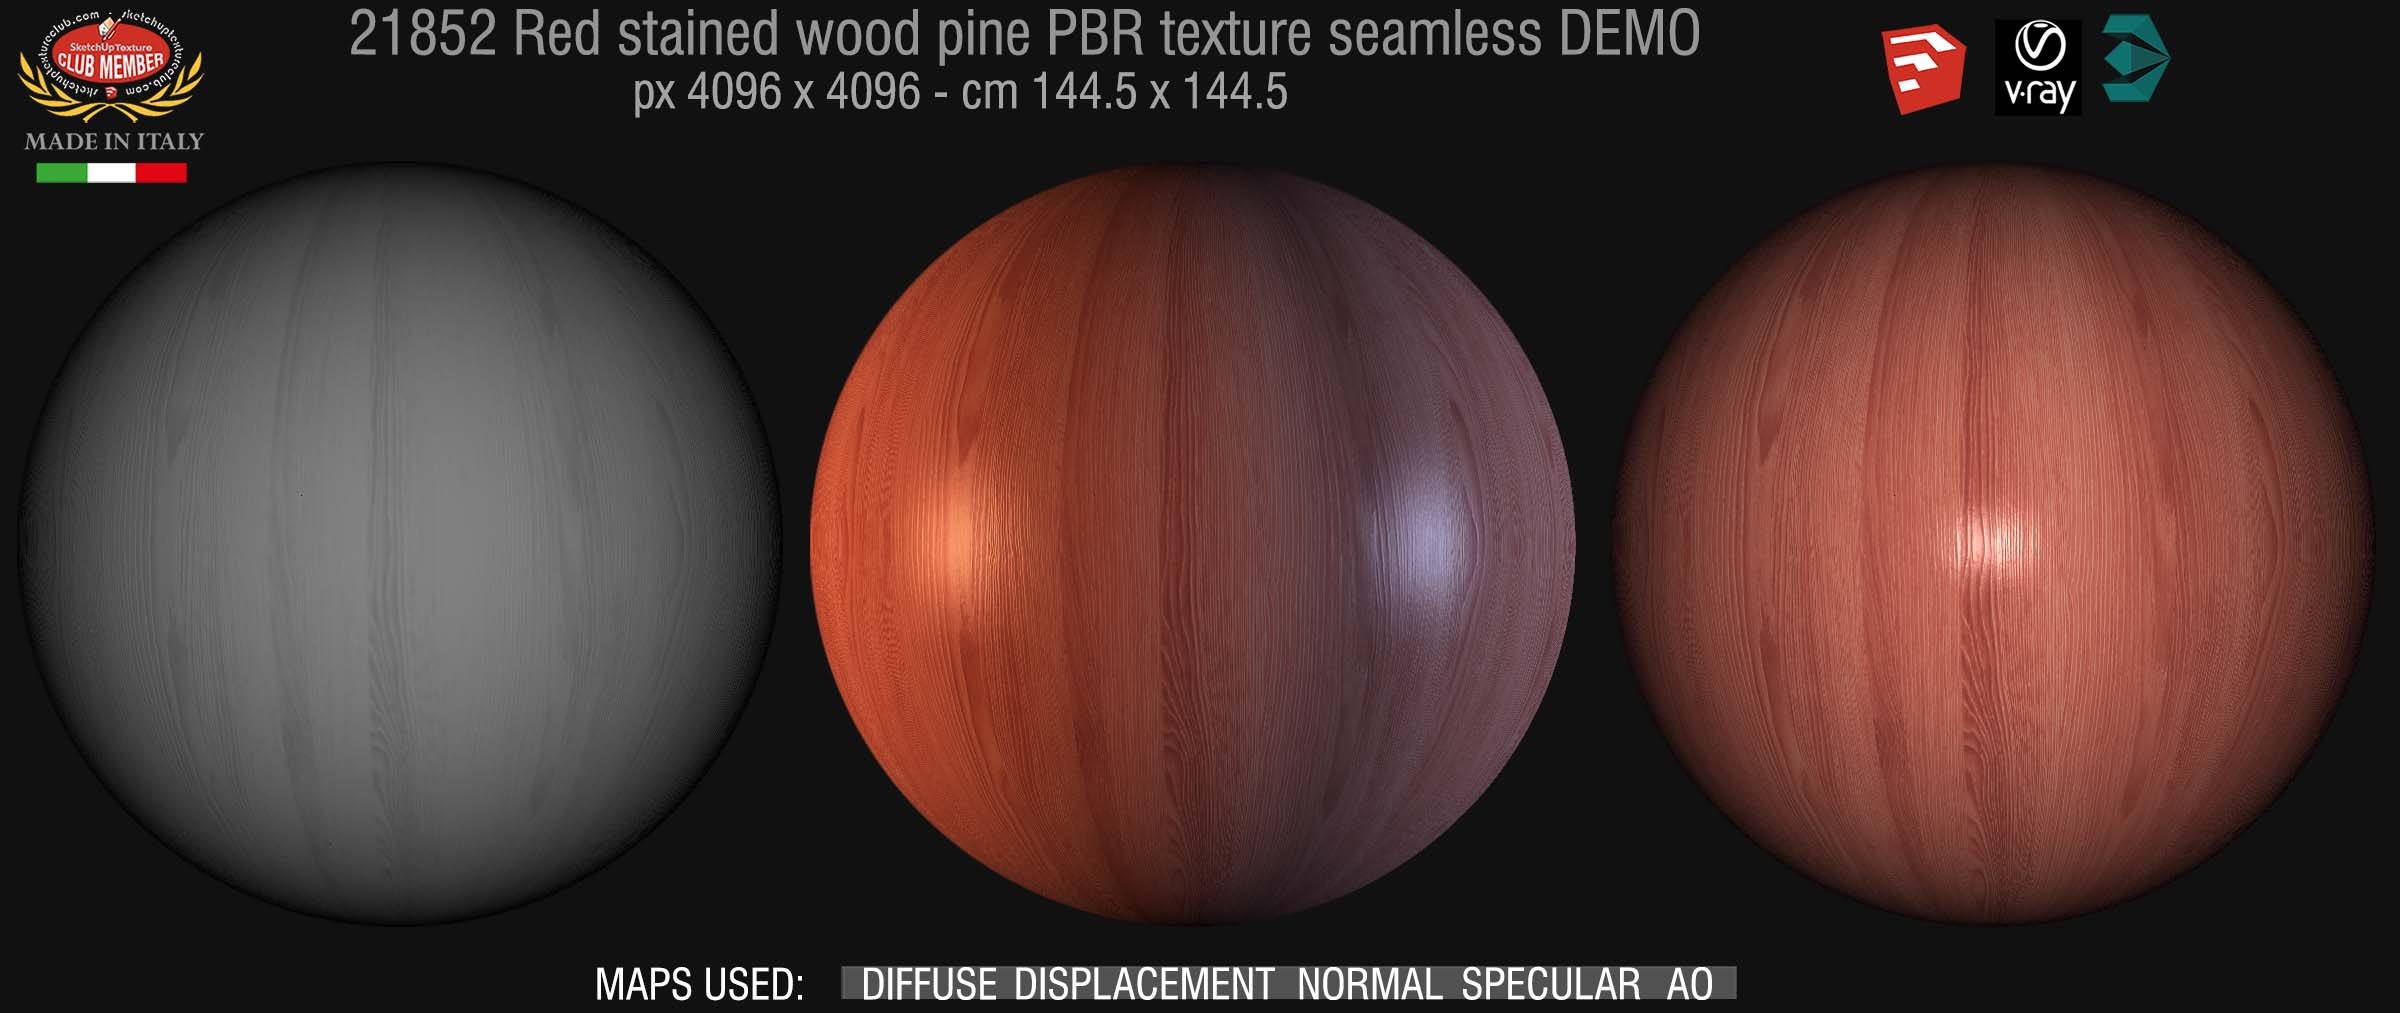 21852 green stained wood pine PBR texture seamless DEMO